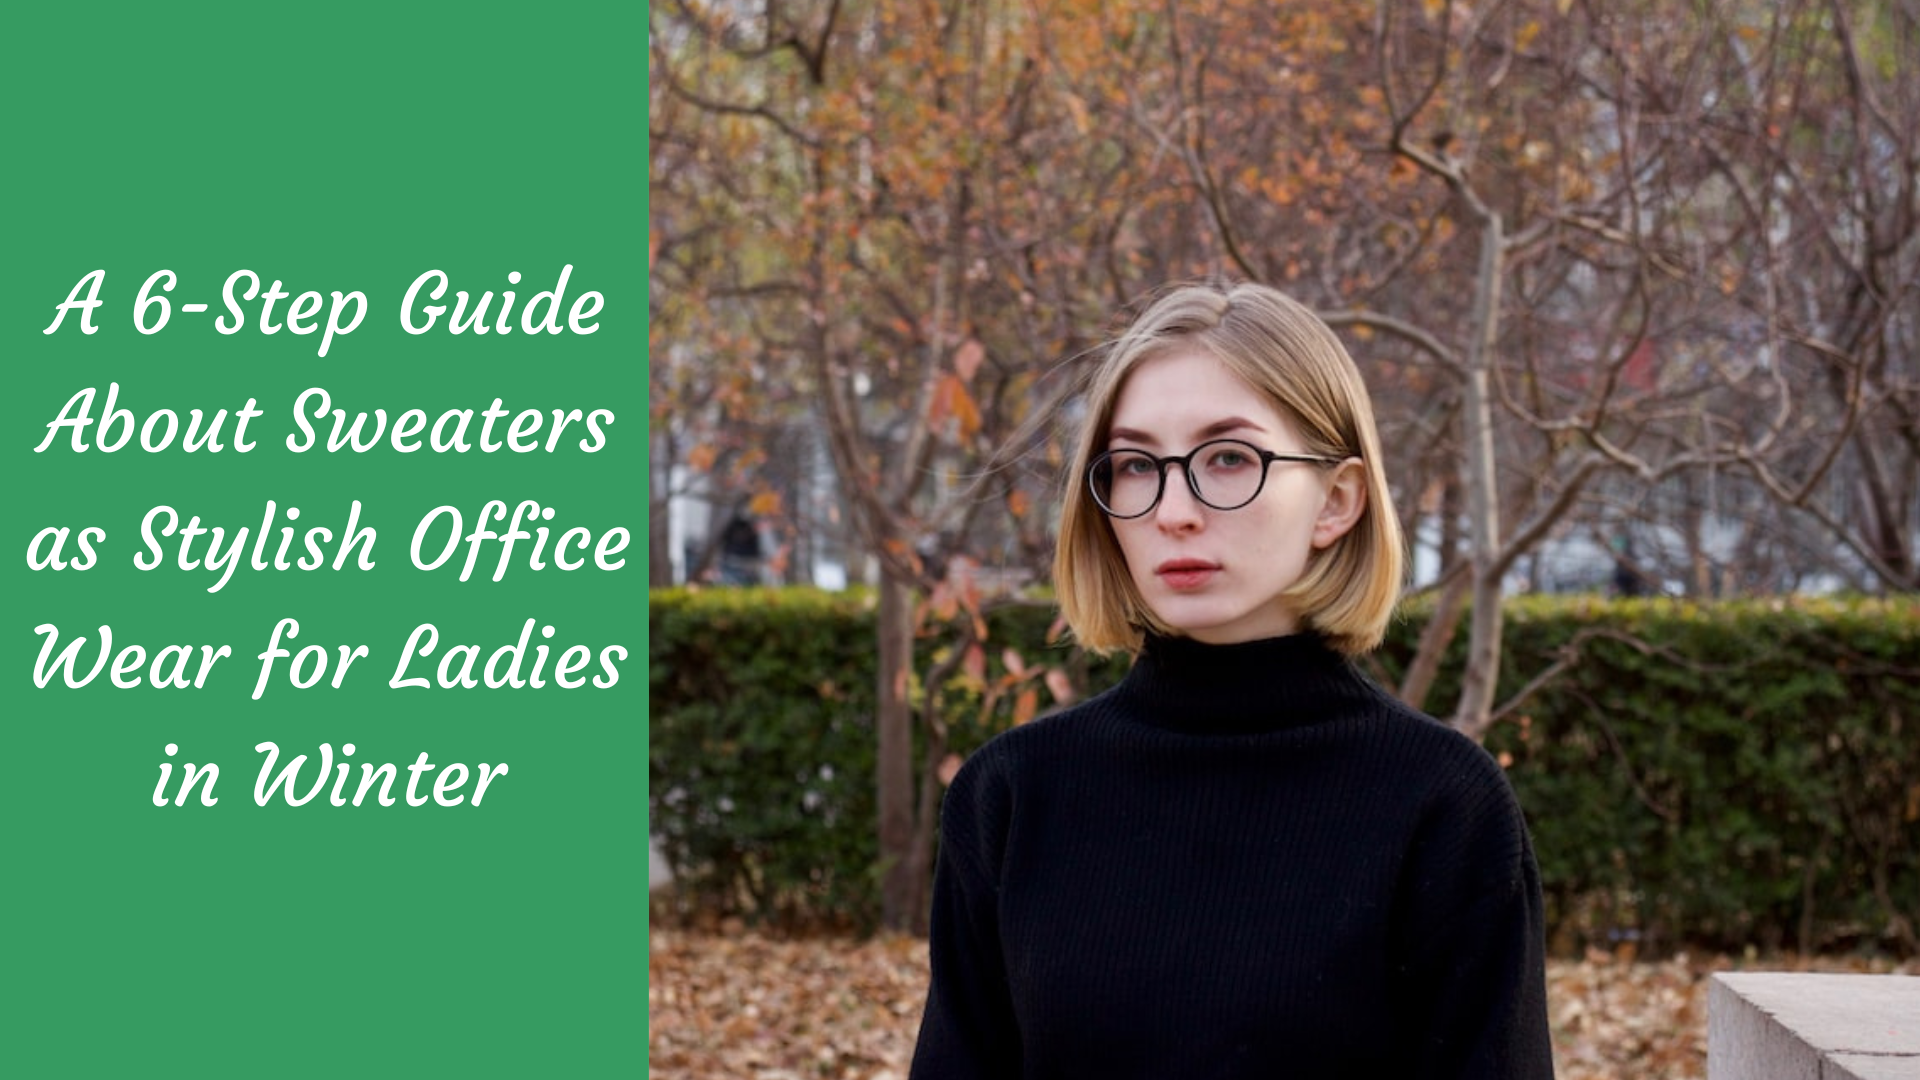 A 6-Step Guide About Sweaters as Stylish Office Wear for Ladies in